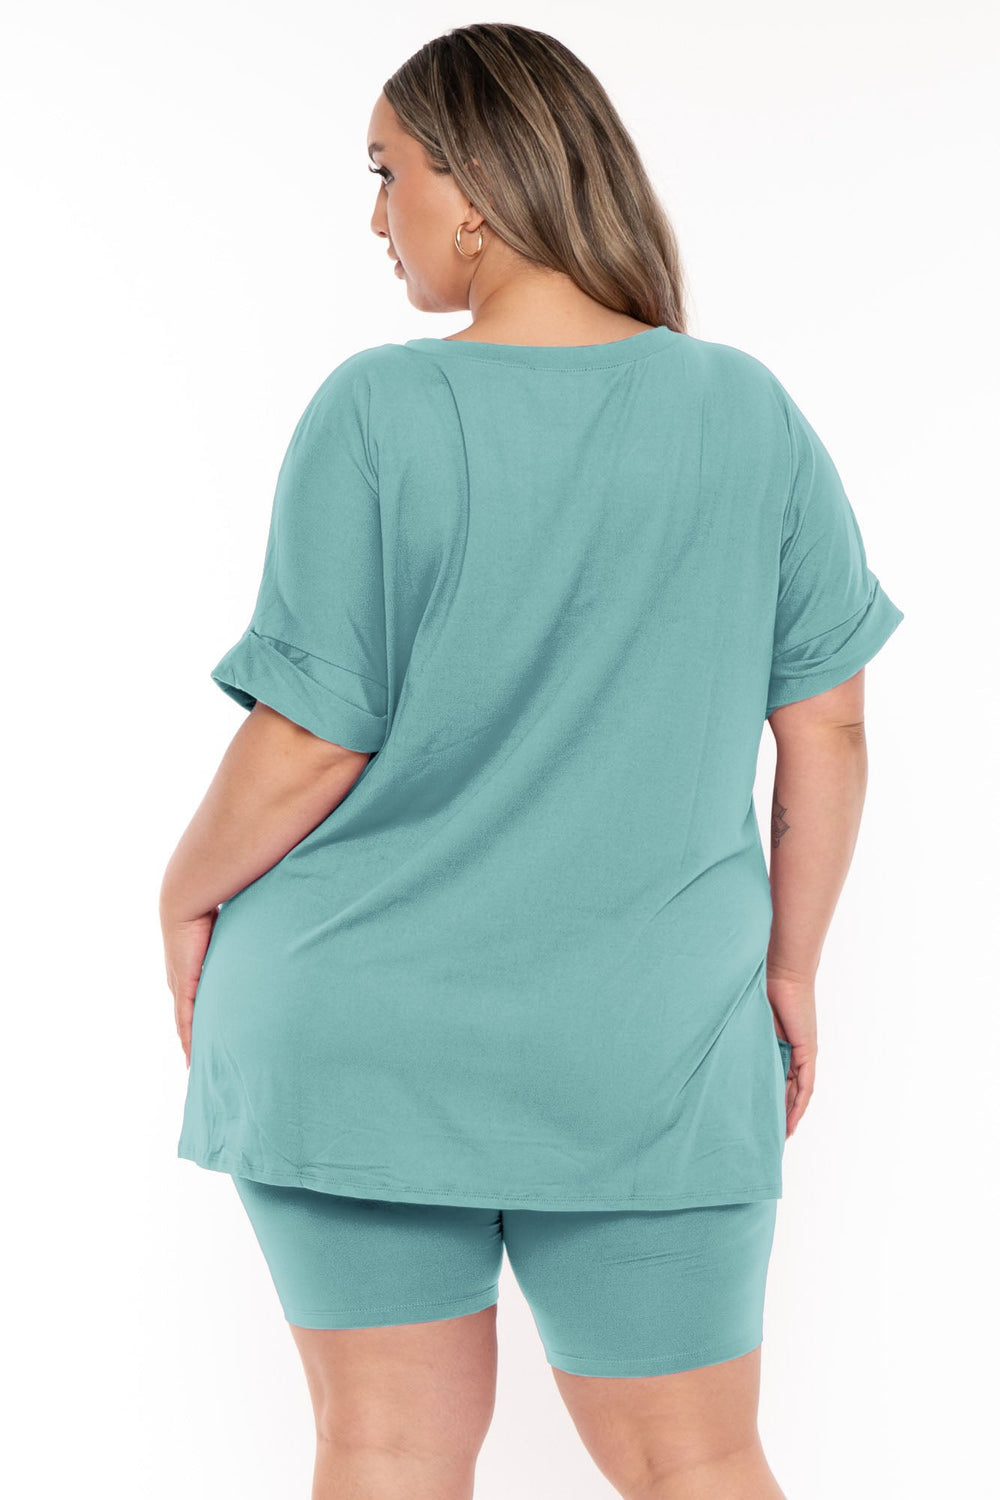 Zenana Jumpsuits and Rompers Plus Size Lexia top and Short Set- Teal